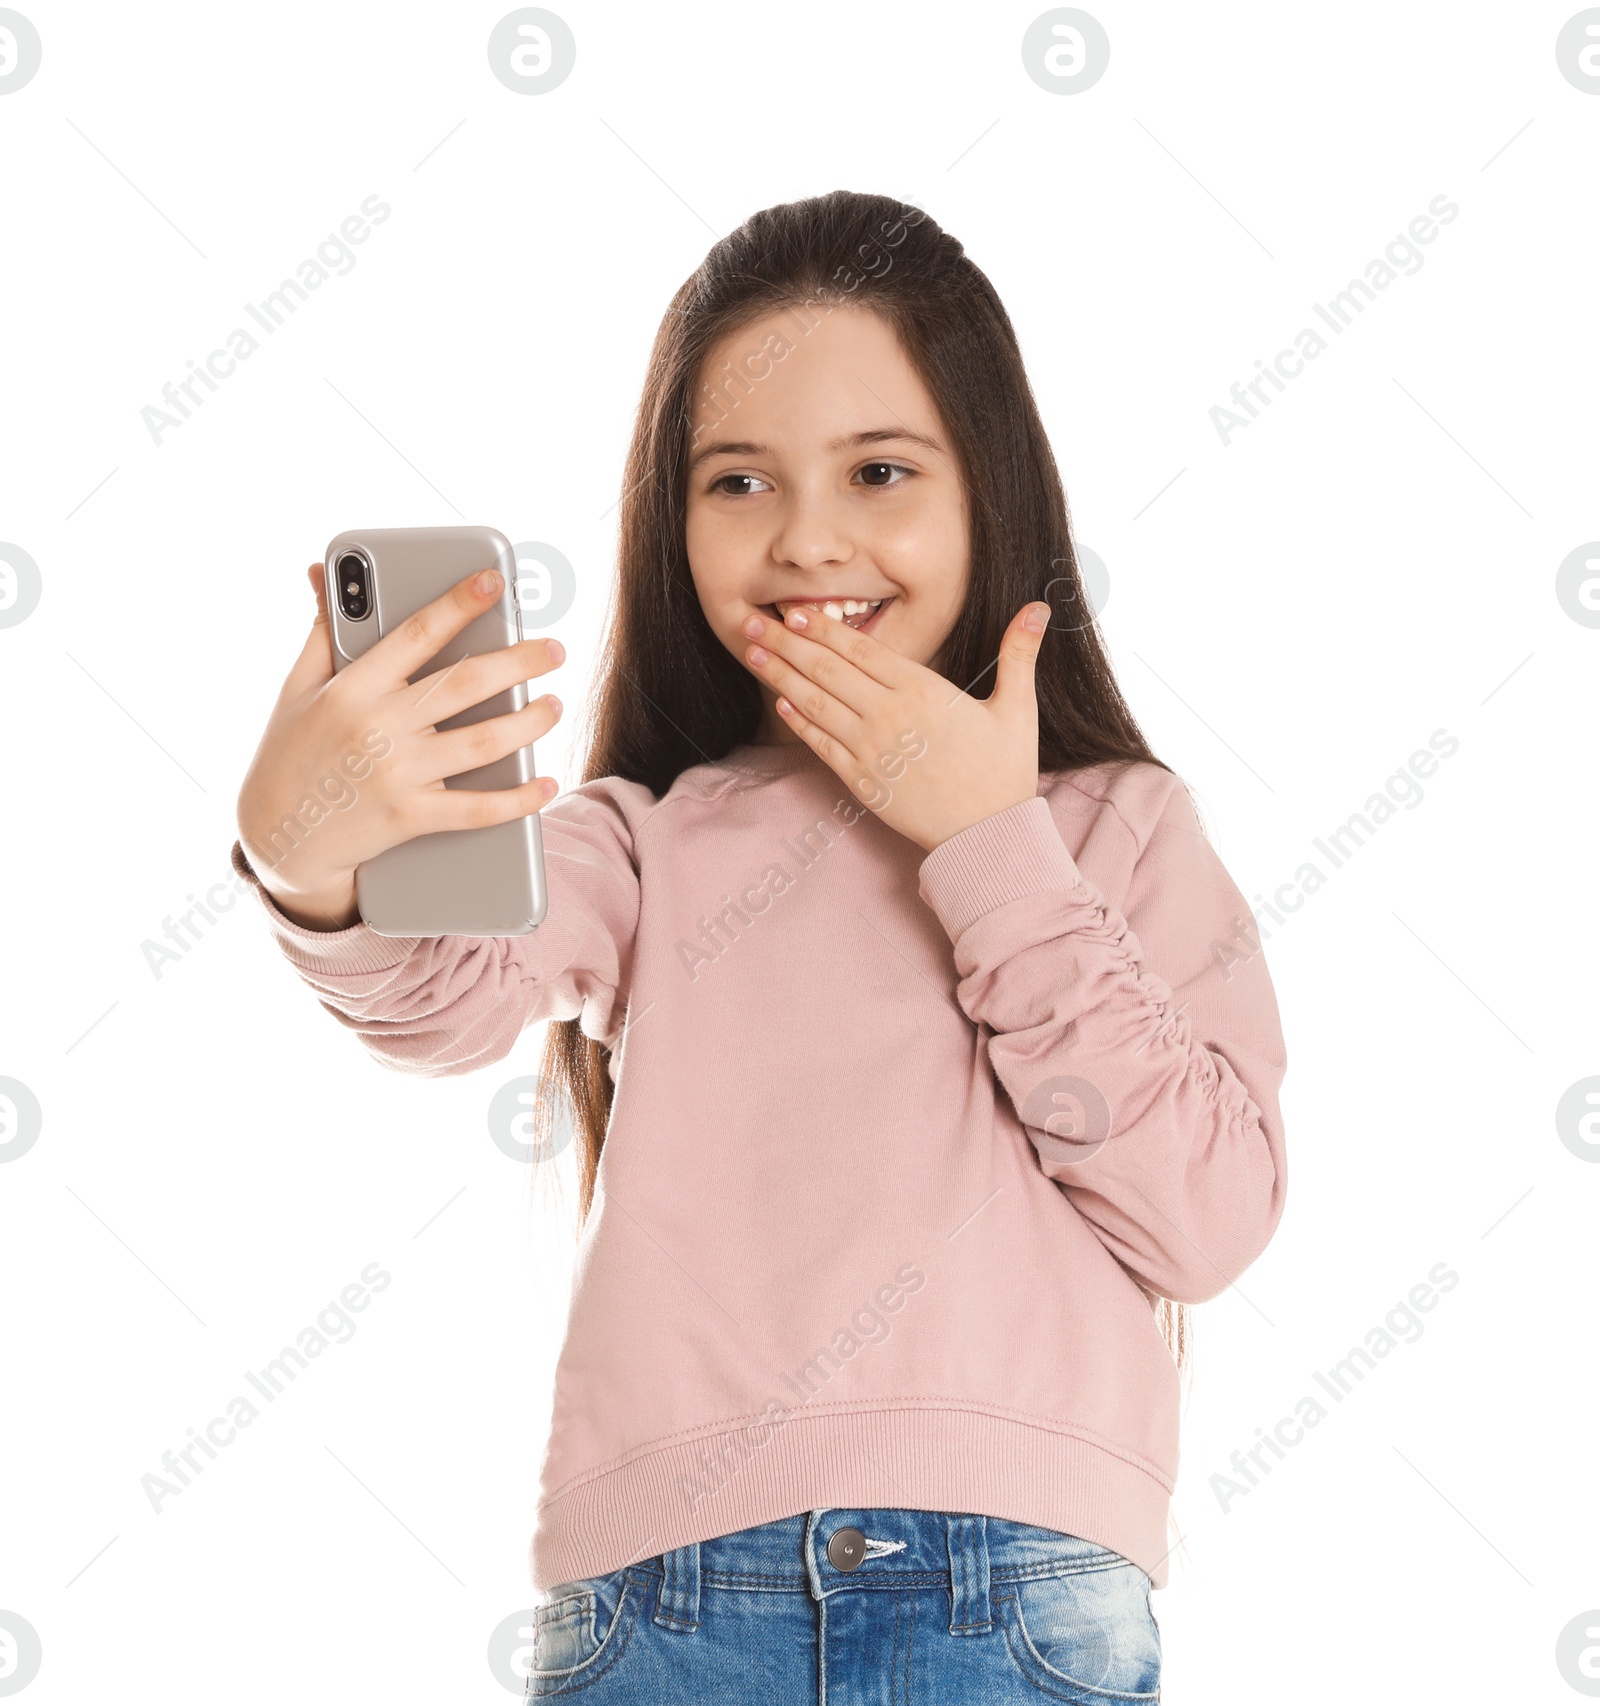 Photo of Little girl using video chat on smartphone against white background